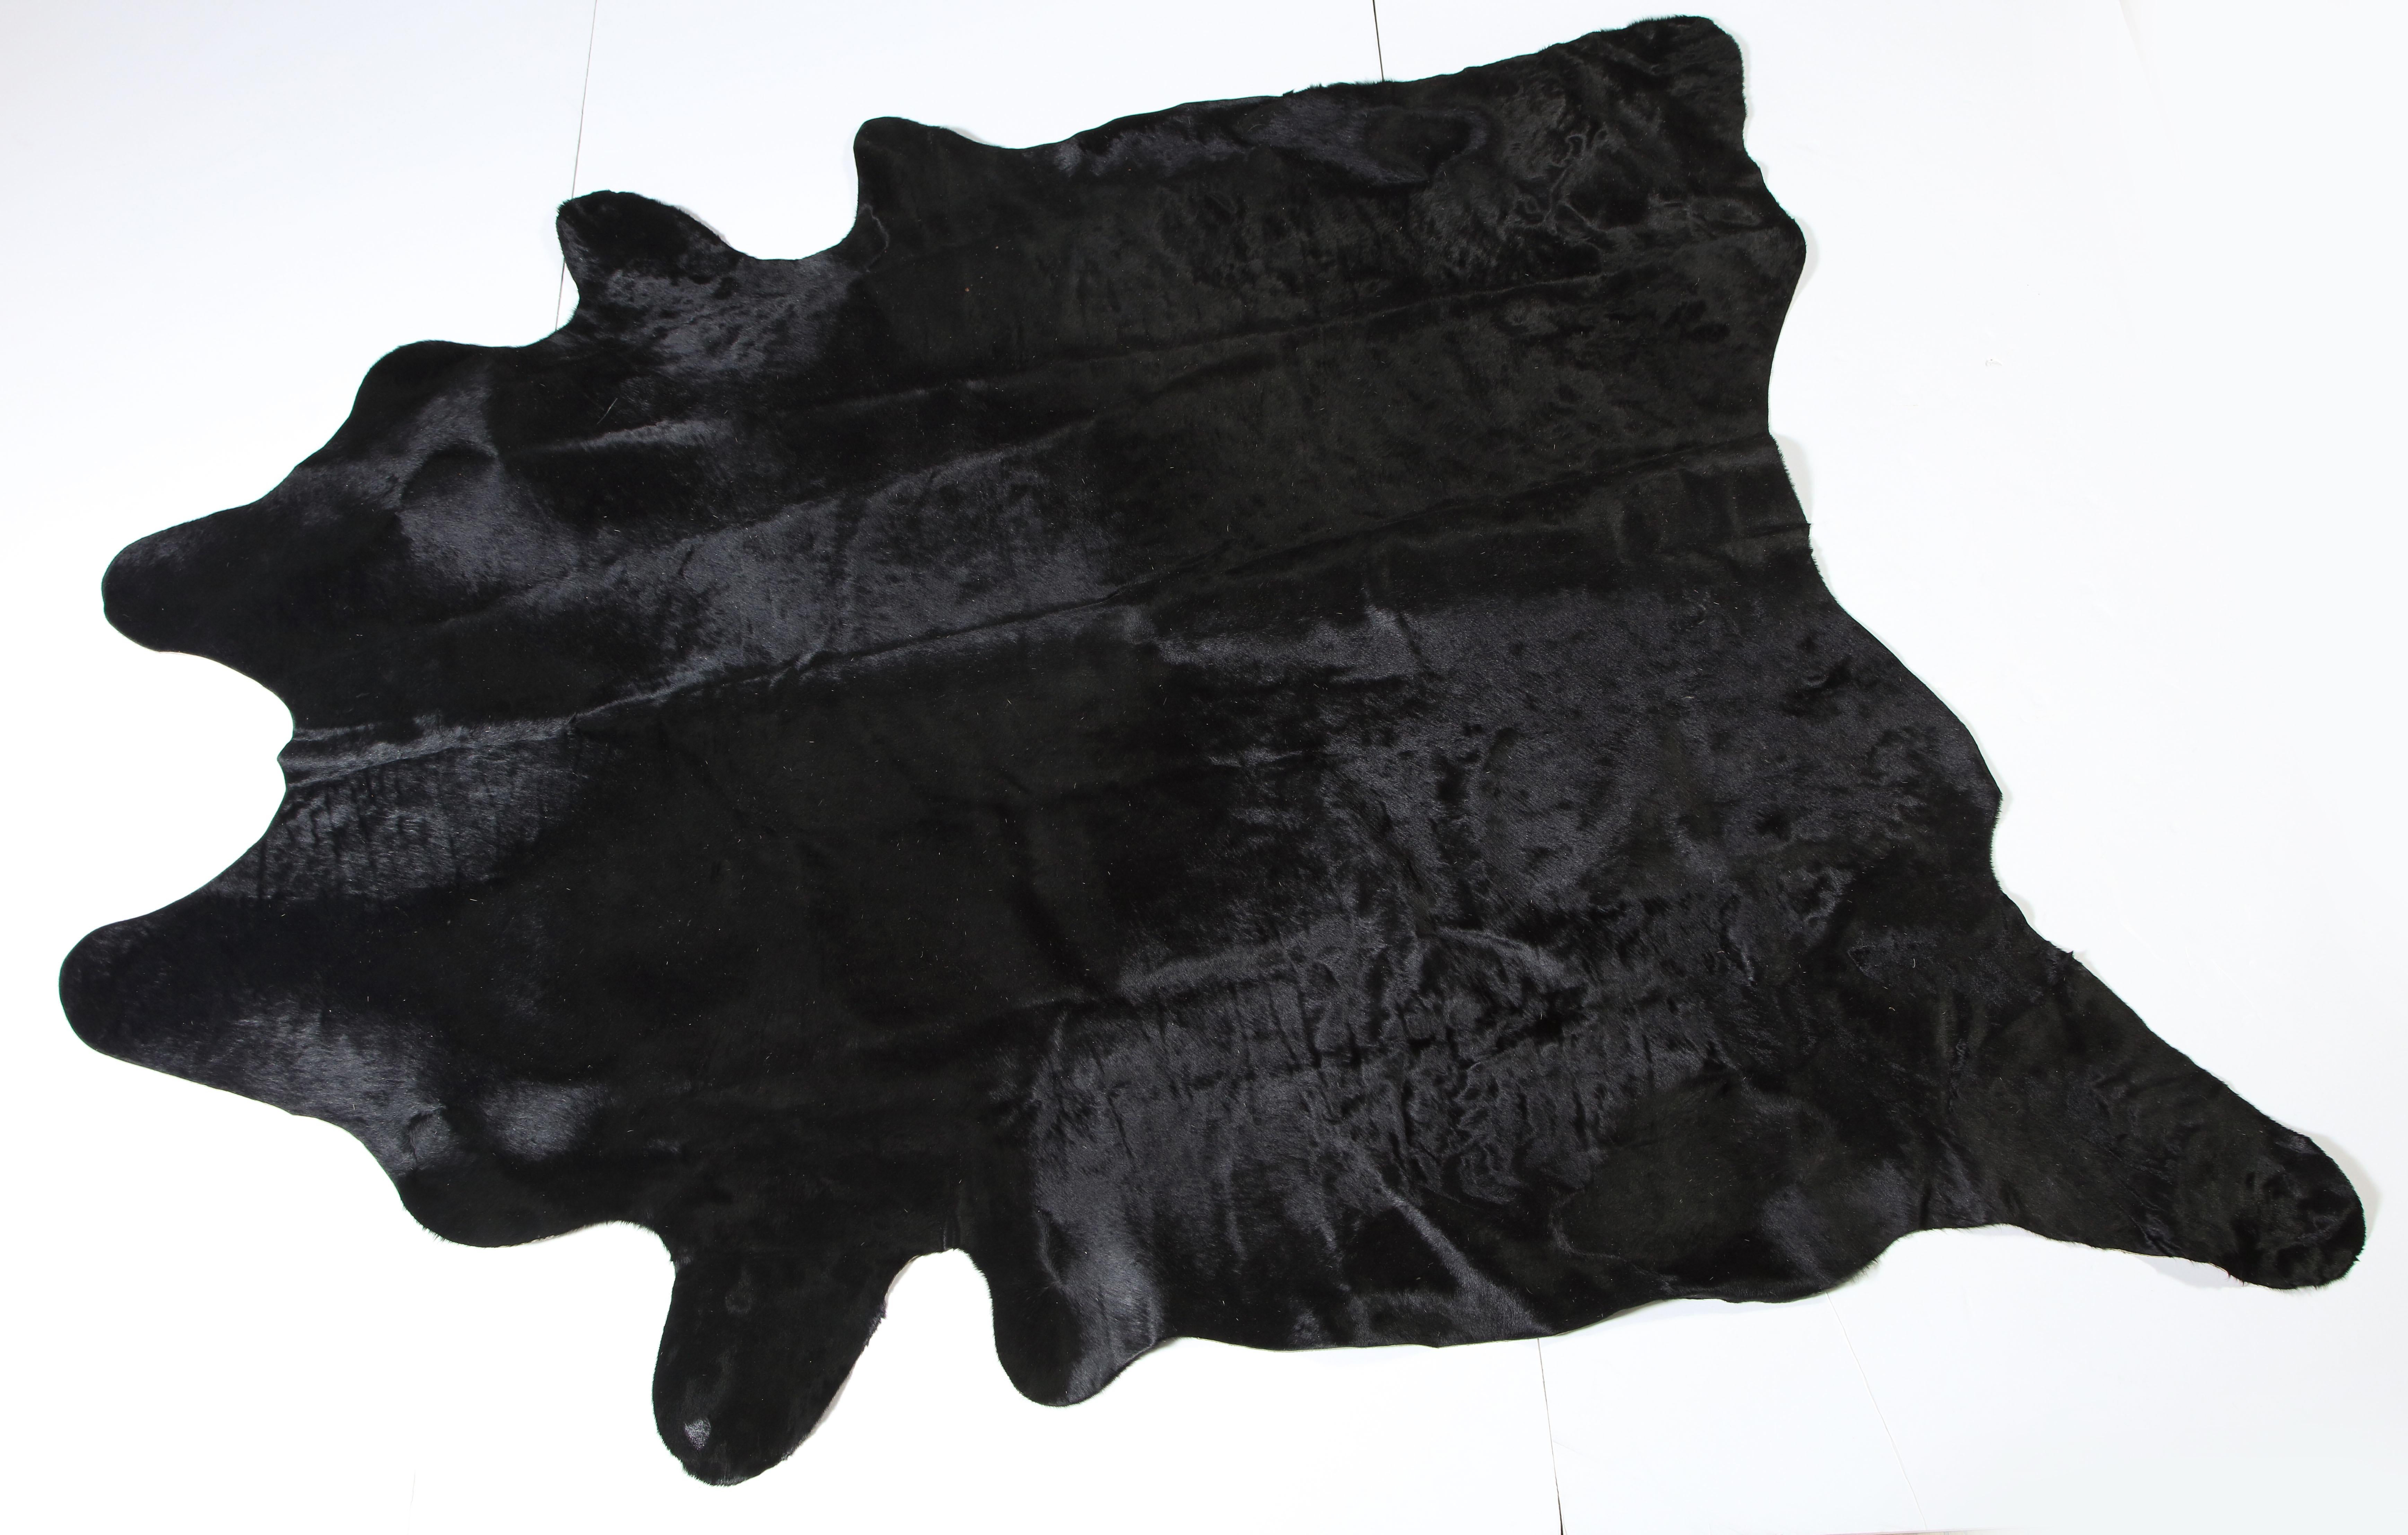 Cow hide, jet black. Lightly used. 
If you measure from each leg, one direction is 110 inches and the other direction is 109 inches.